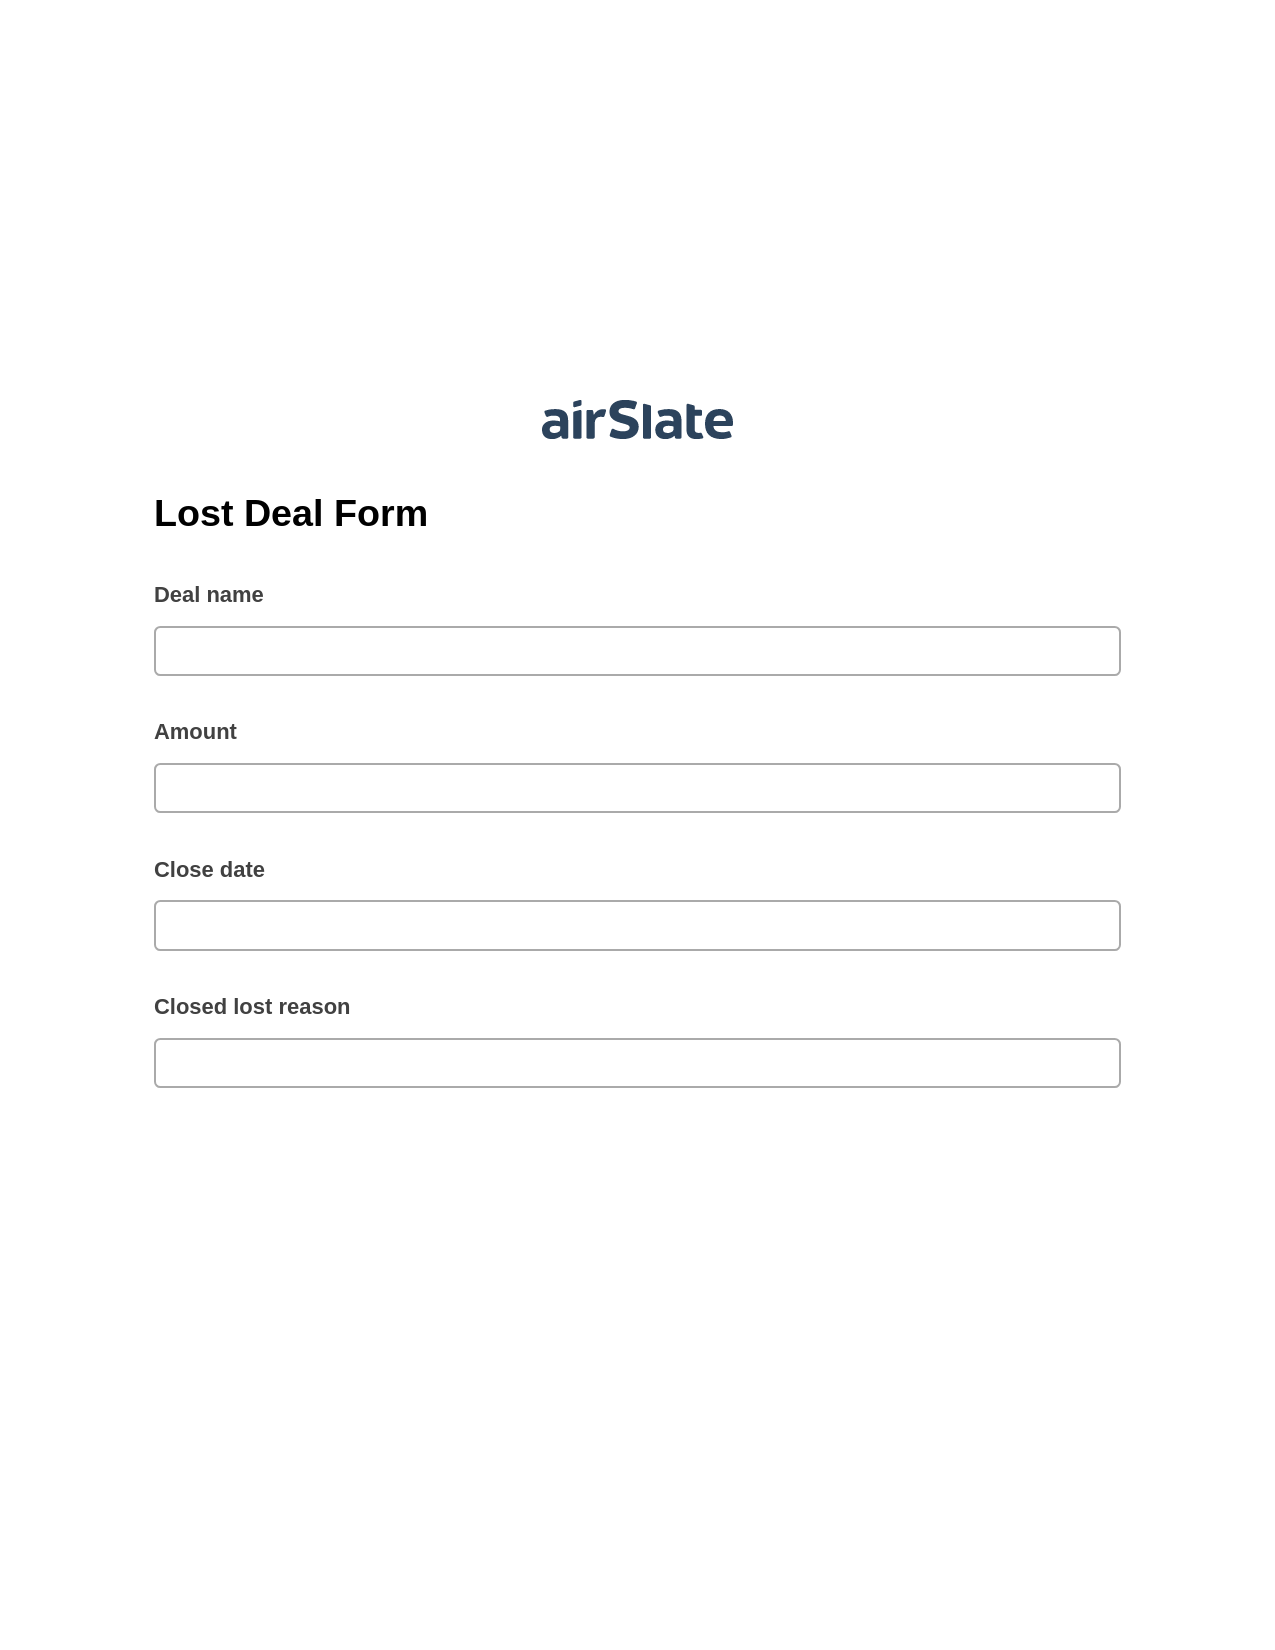 Lost Deal Form Pre-fill from CSV File Bot, Custom Field's Value Bot, Export to Salesforce Record Bot